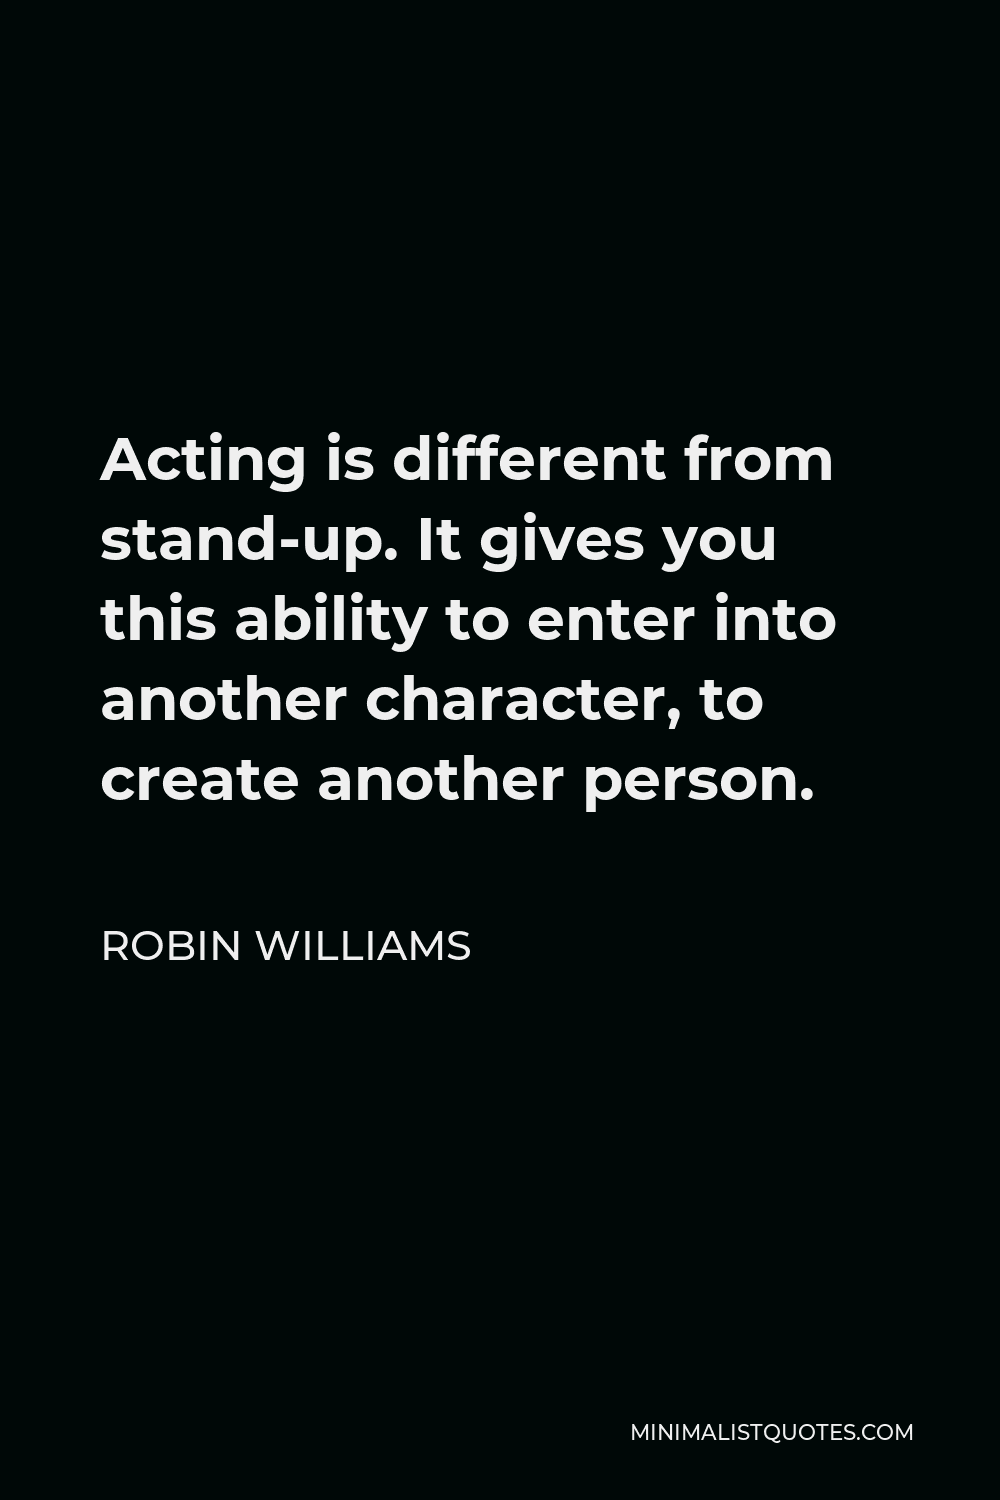 Robin Williams Quote - Acting is different from stand-up. It gives you this ability to enter into another character, to create another person.